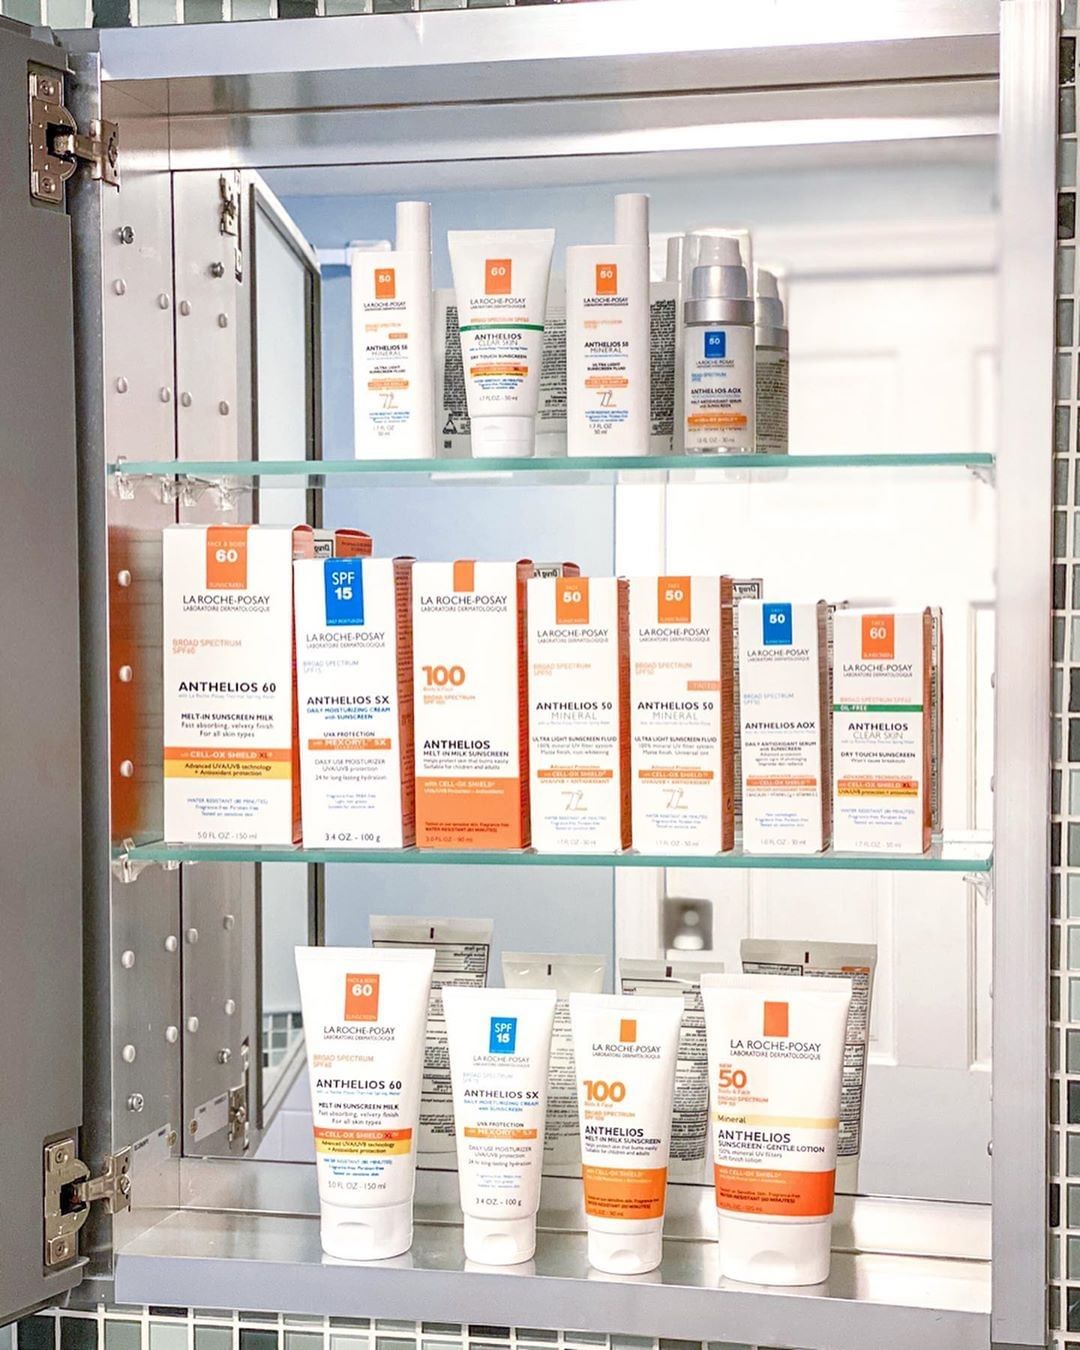 La Roche-Posay USA - Today is #NationalSunscreenDay and @voguishsoul #shelfie is up to par!
Key sun safety habits to live by not only during the summer but year-round:
1️⃣ Wear sunscreen daily ☀️
2️⃣...